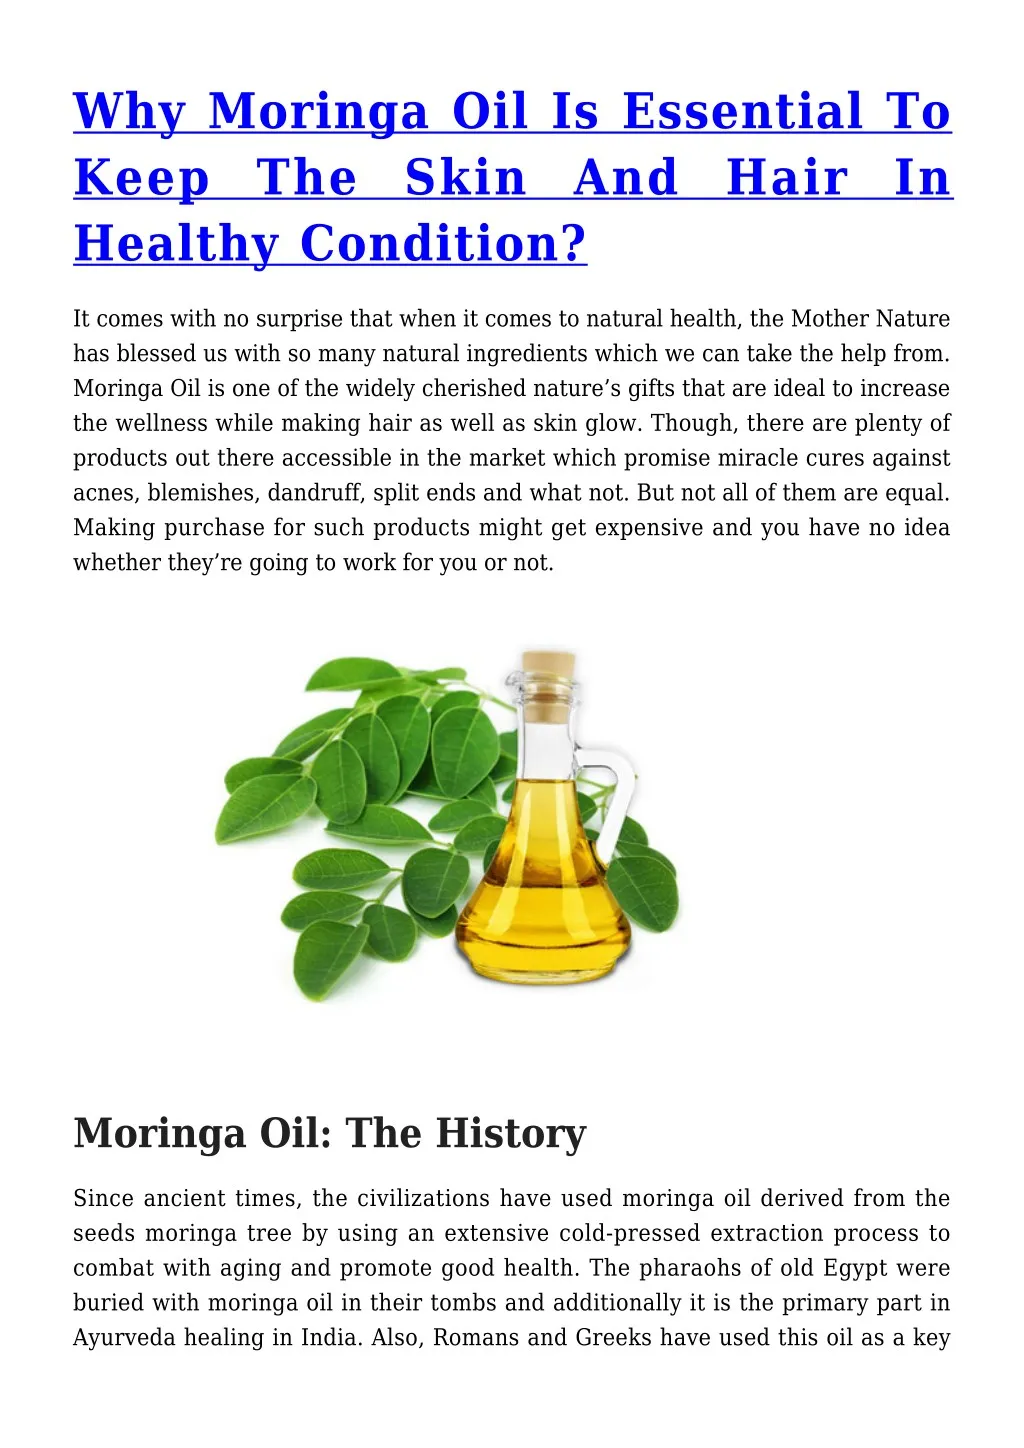 Ppt Why Moringa Oil Is Essential To Keep The Skin And Hair In Healthy Condition Powerpoint Presentation Id 7705800